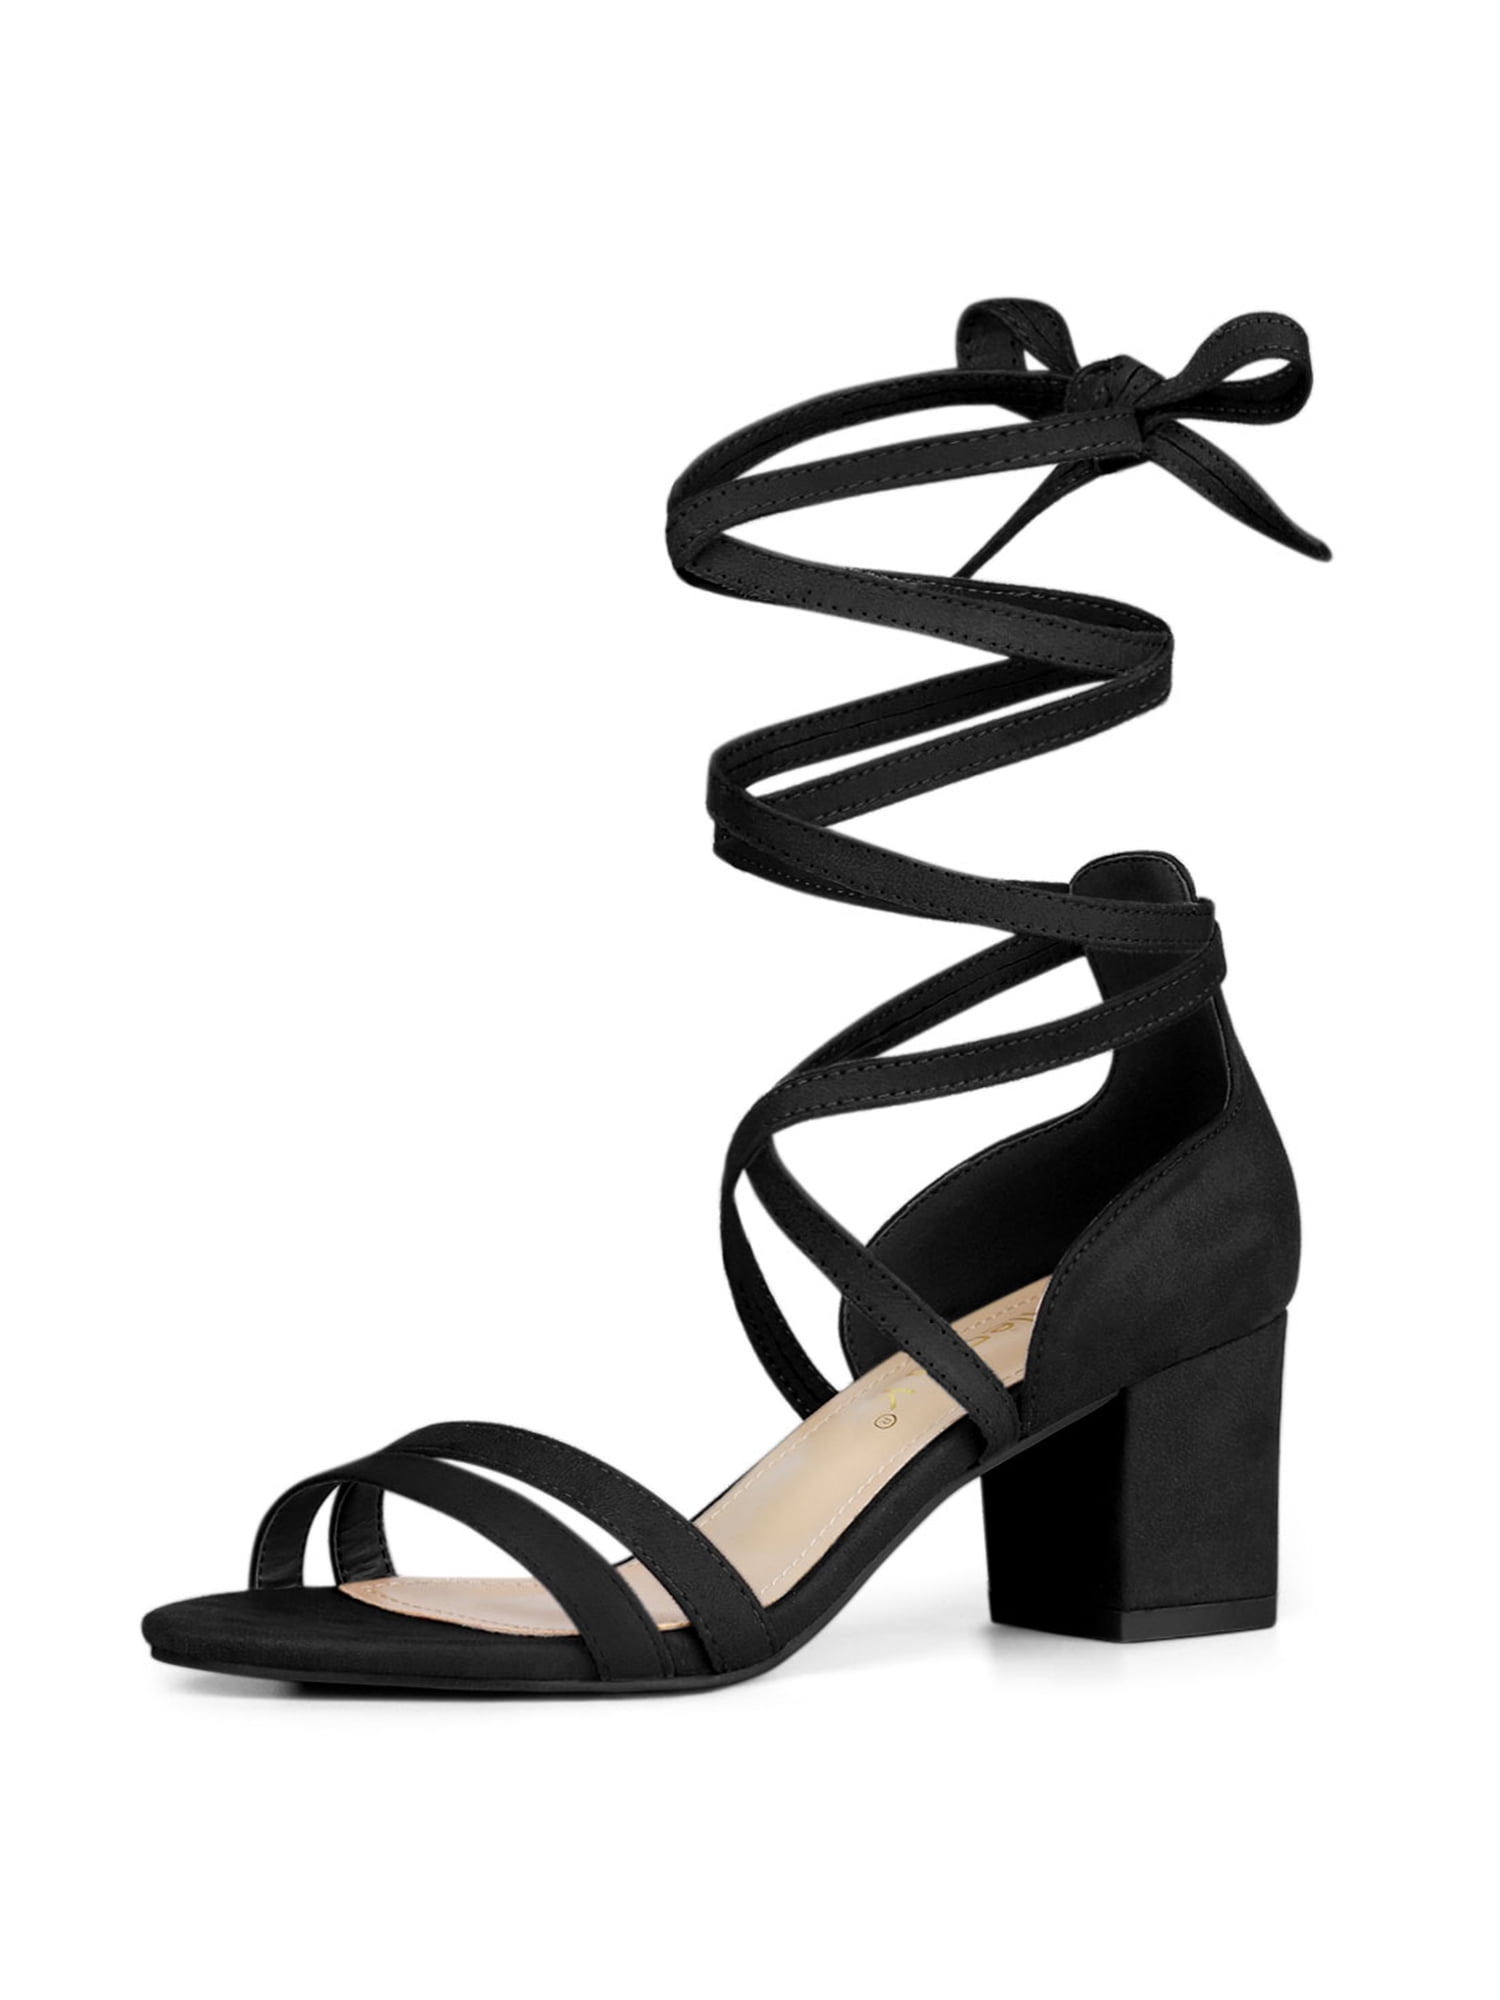 LADIES BLACK FAUX PU LEATHER OPEN TOE STRAPPY SANDALS BLOCK HEEL SHOES UK 3-8 